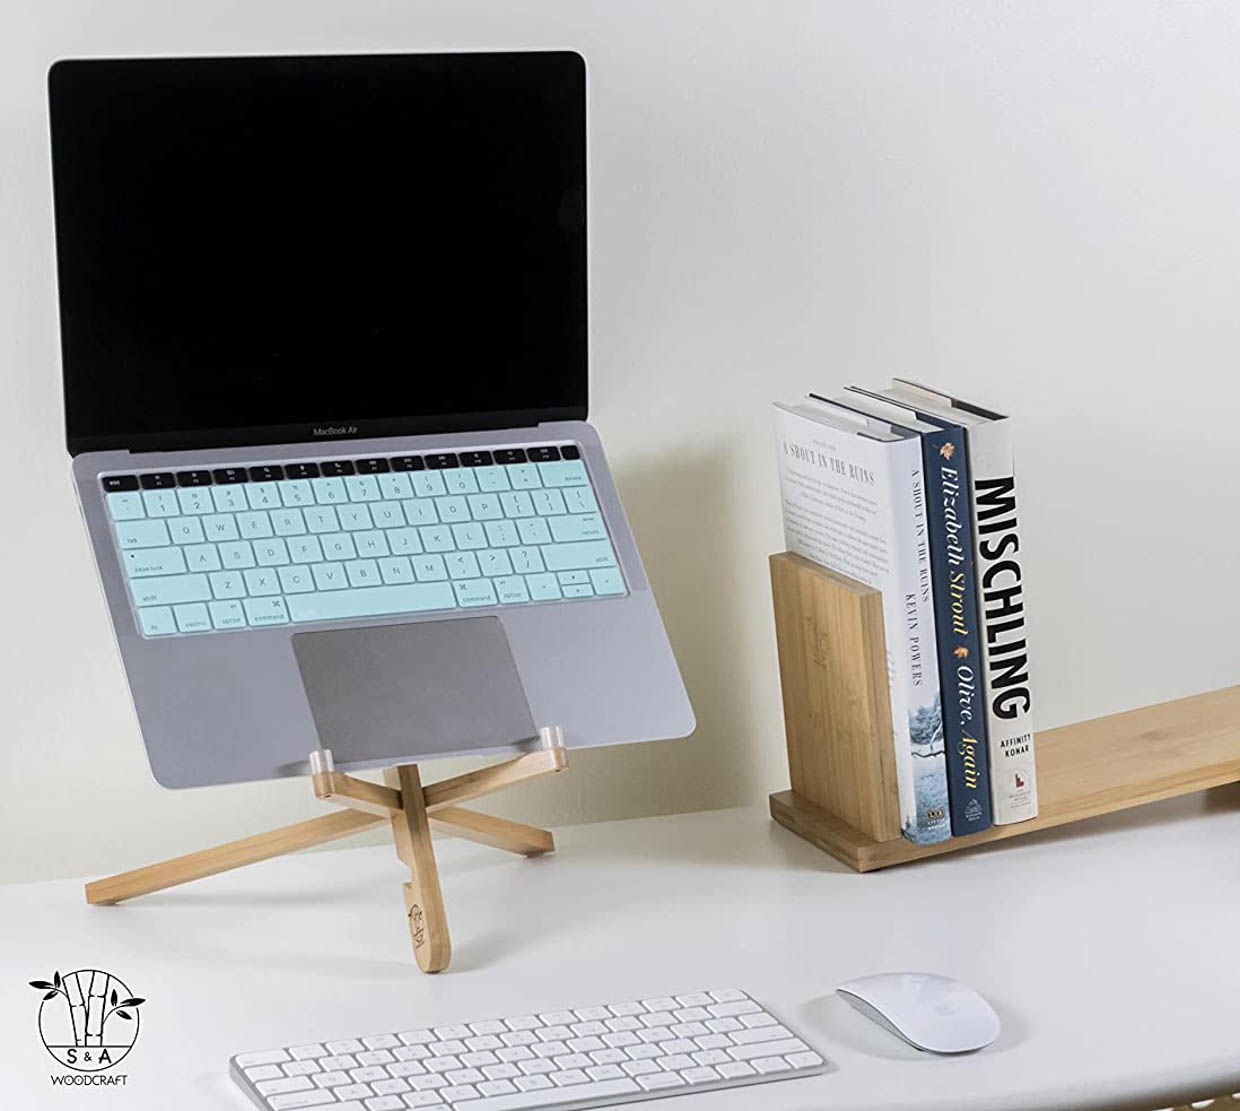 S&A Woodcraft Laptop Stand